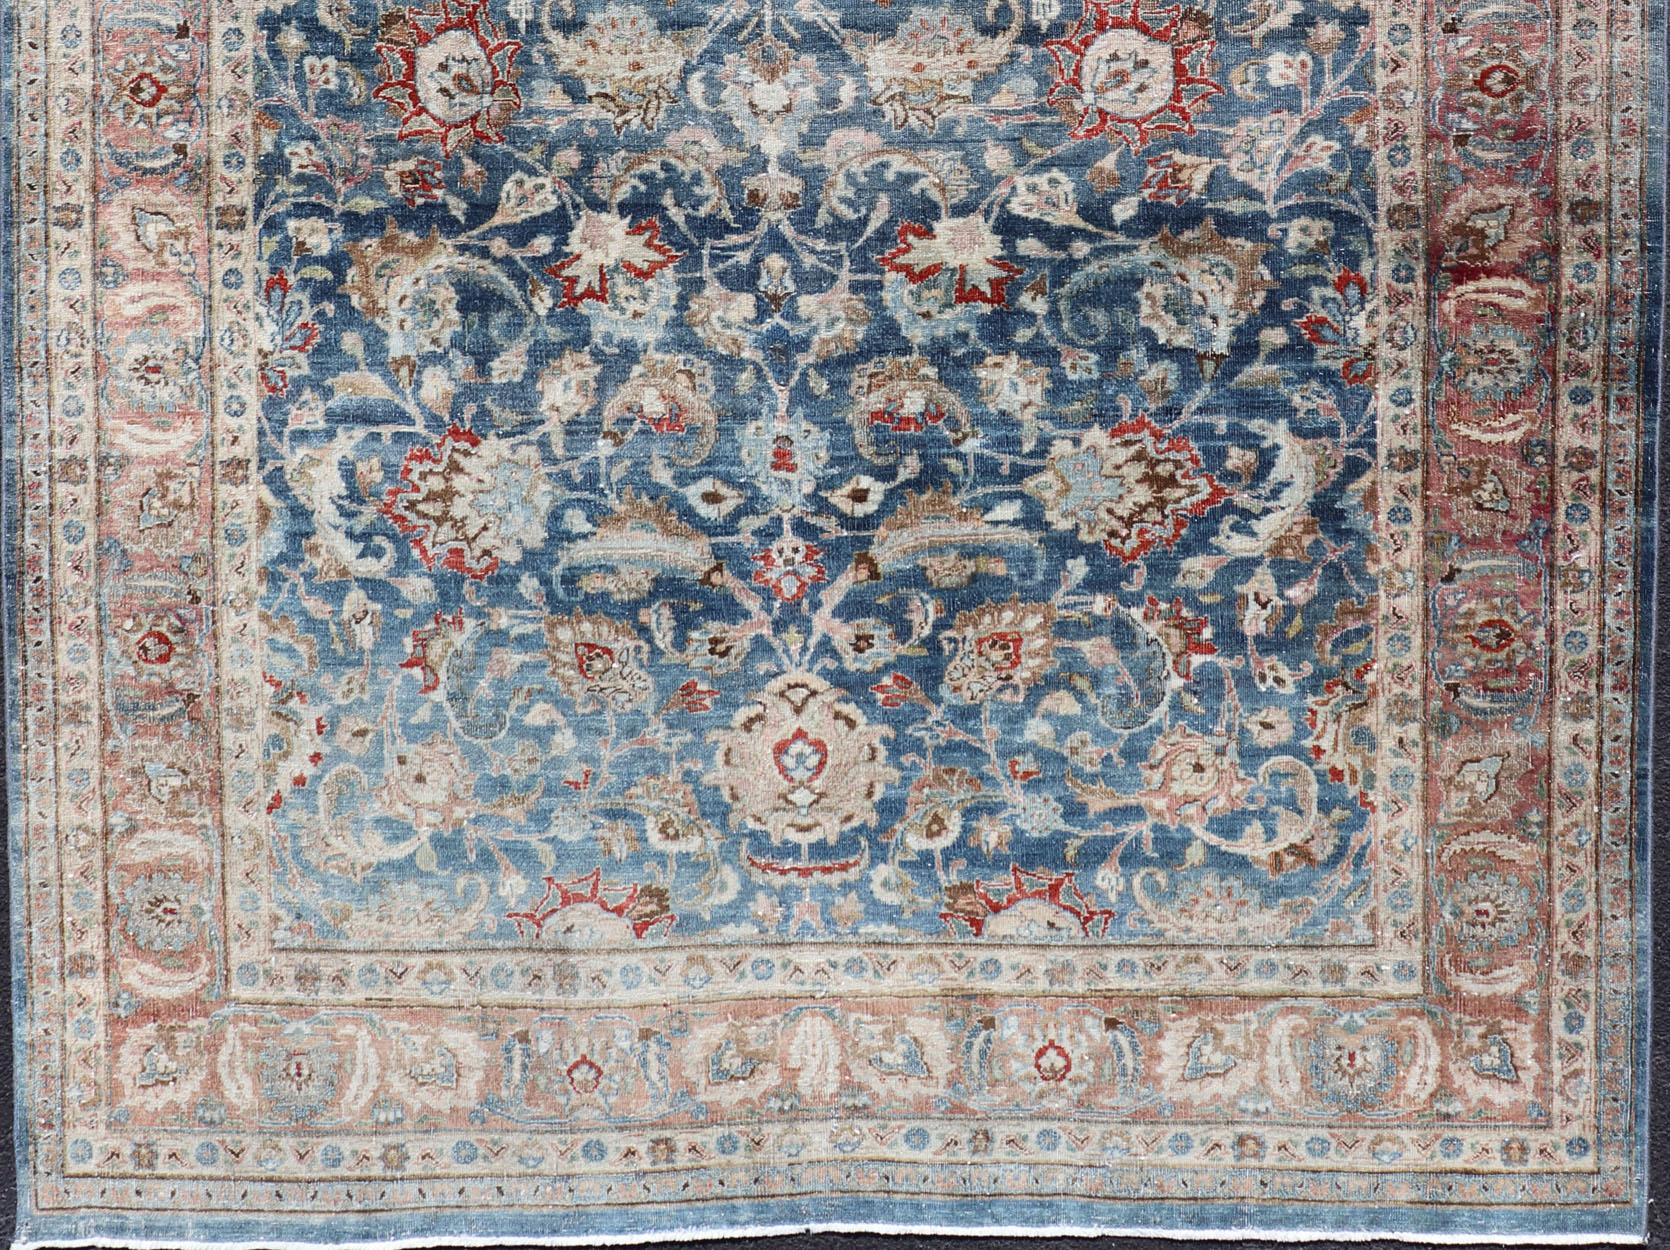 Antique Persian Mashad rug with blue background and light rose border. Rug / R20-0824
Mashad is a major city in the north eastern Iran, located in the Khorossan Province. This antique Mashhad rug displays a botanical all-over design with beautiful